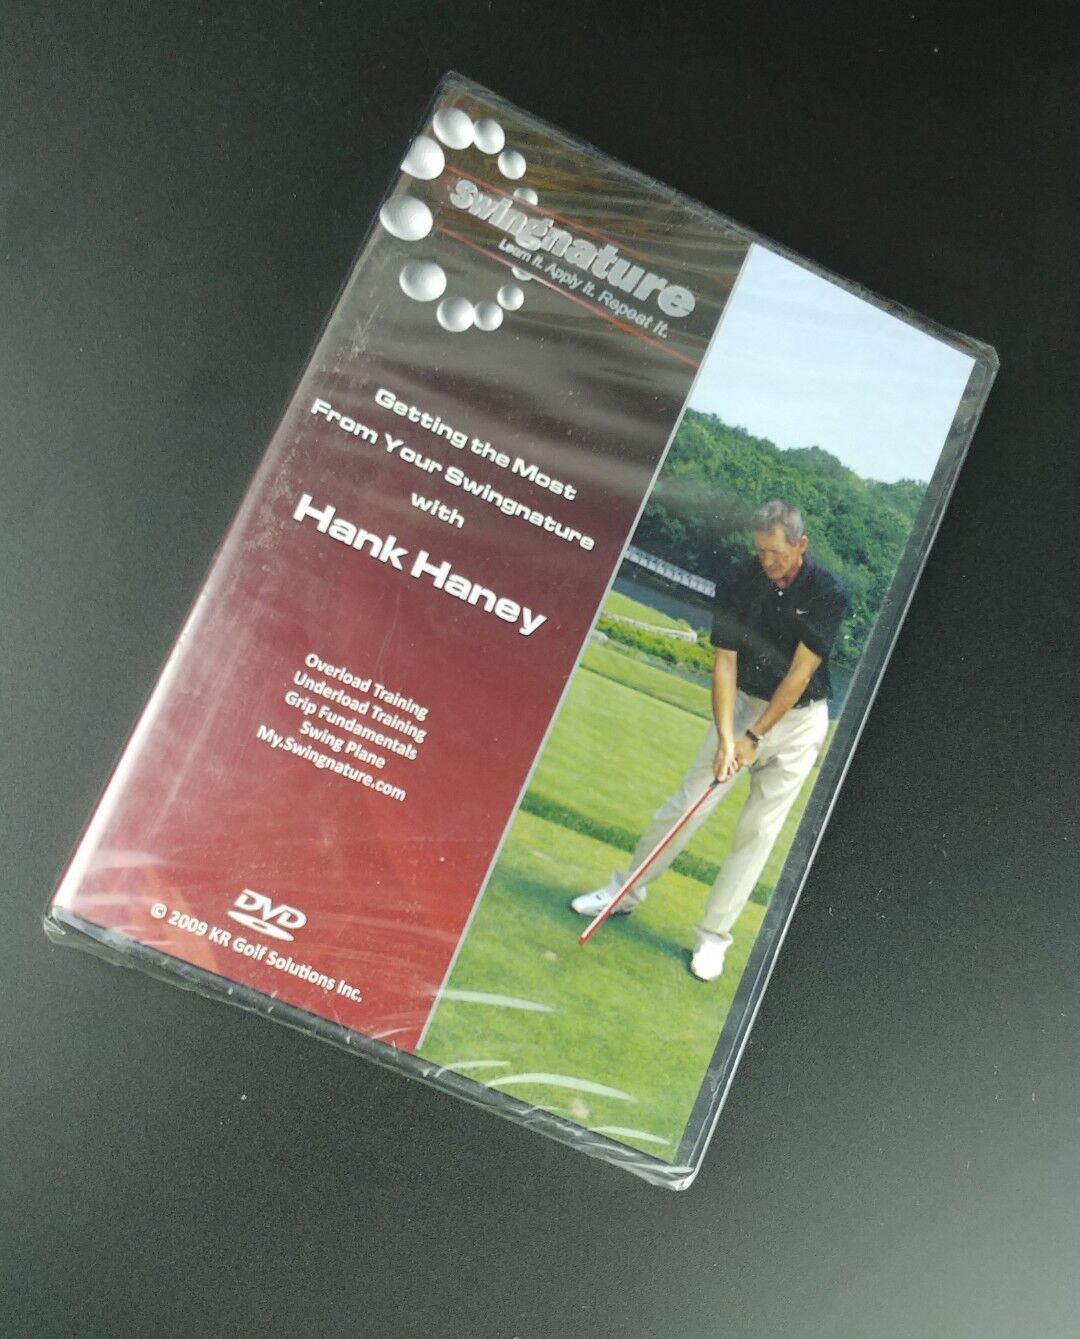 Getting The Most From Your Swingnature with Hank Haney (DVD) golf swing lessons